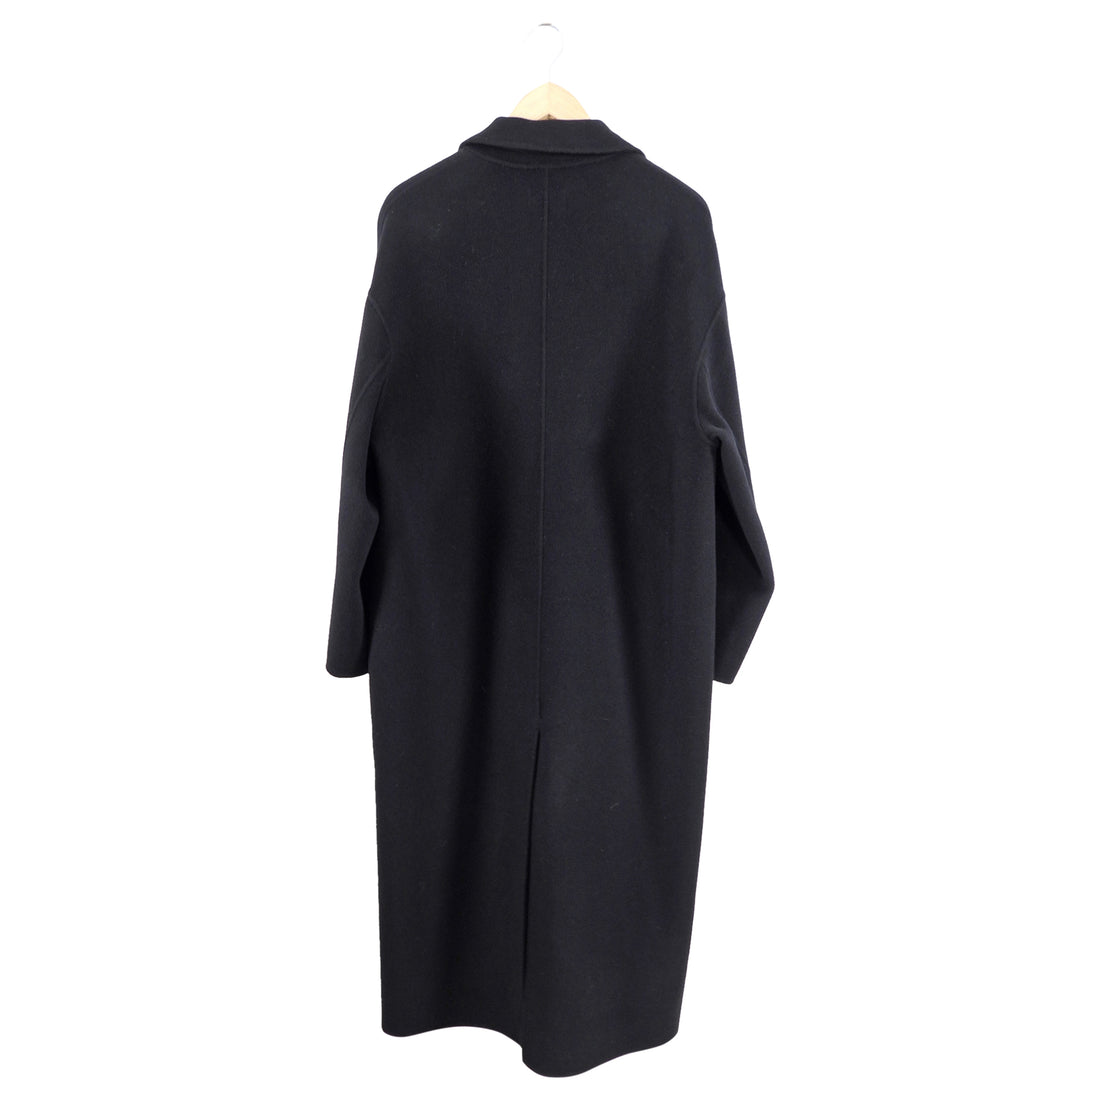 LouLou Studio Borneo Black Wool and Cashmere Oversized Double Breasted Coat - S